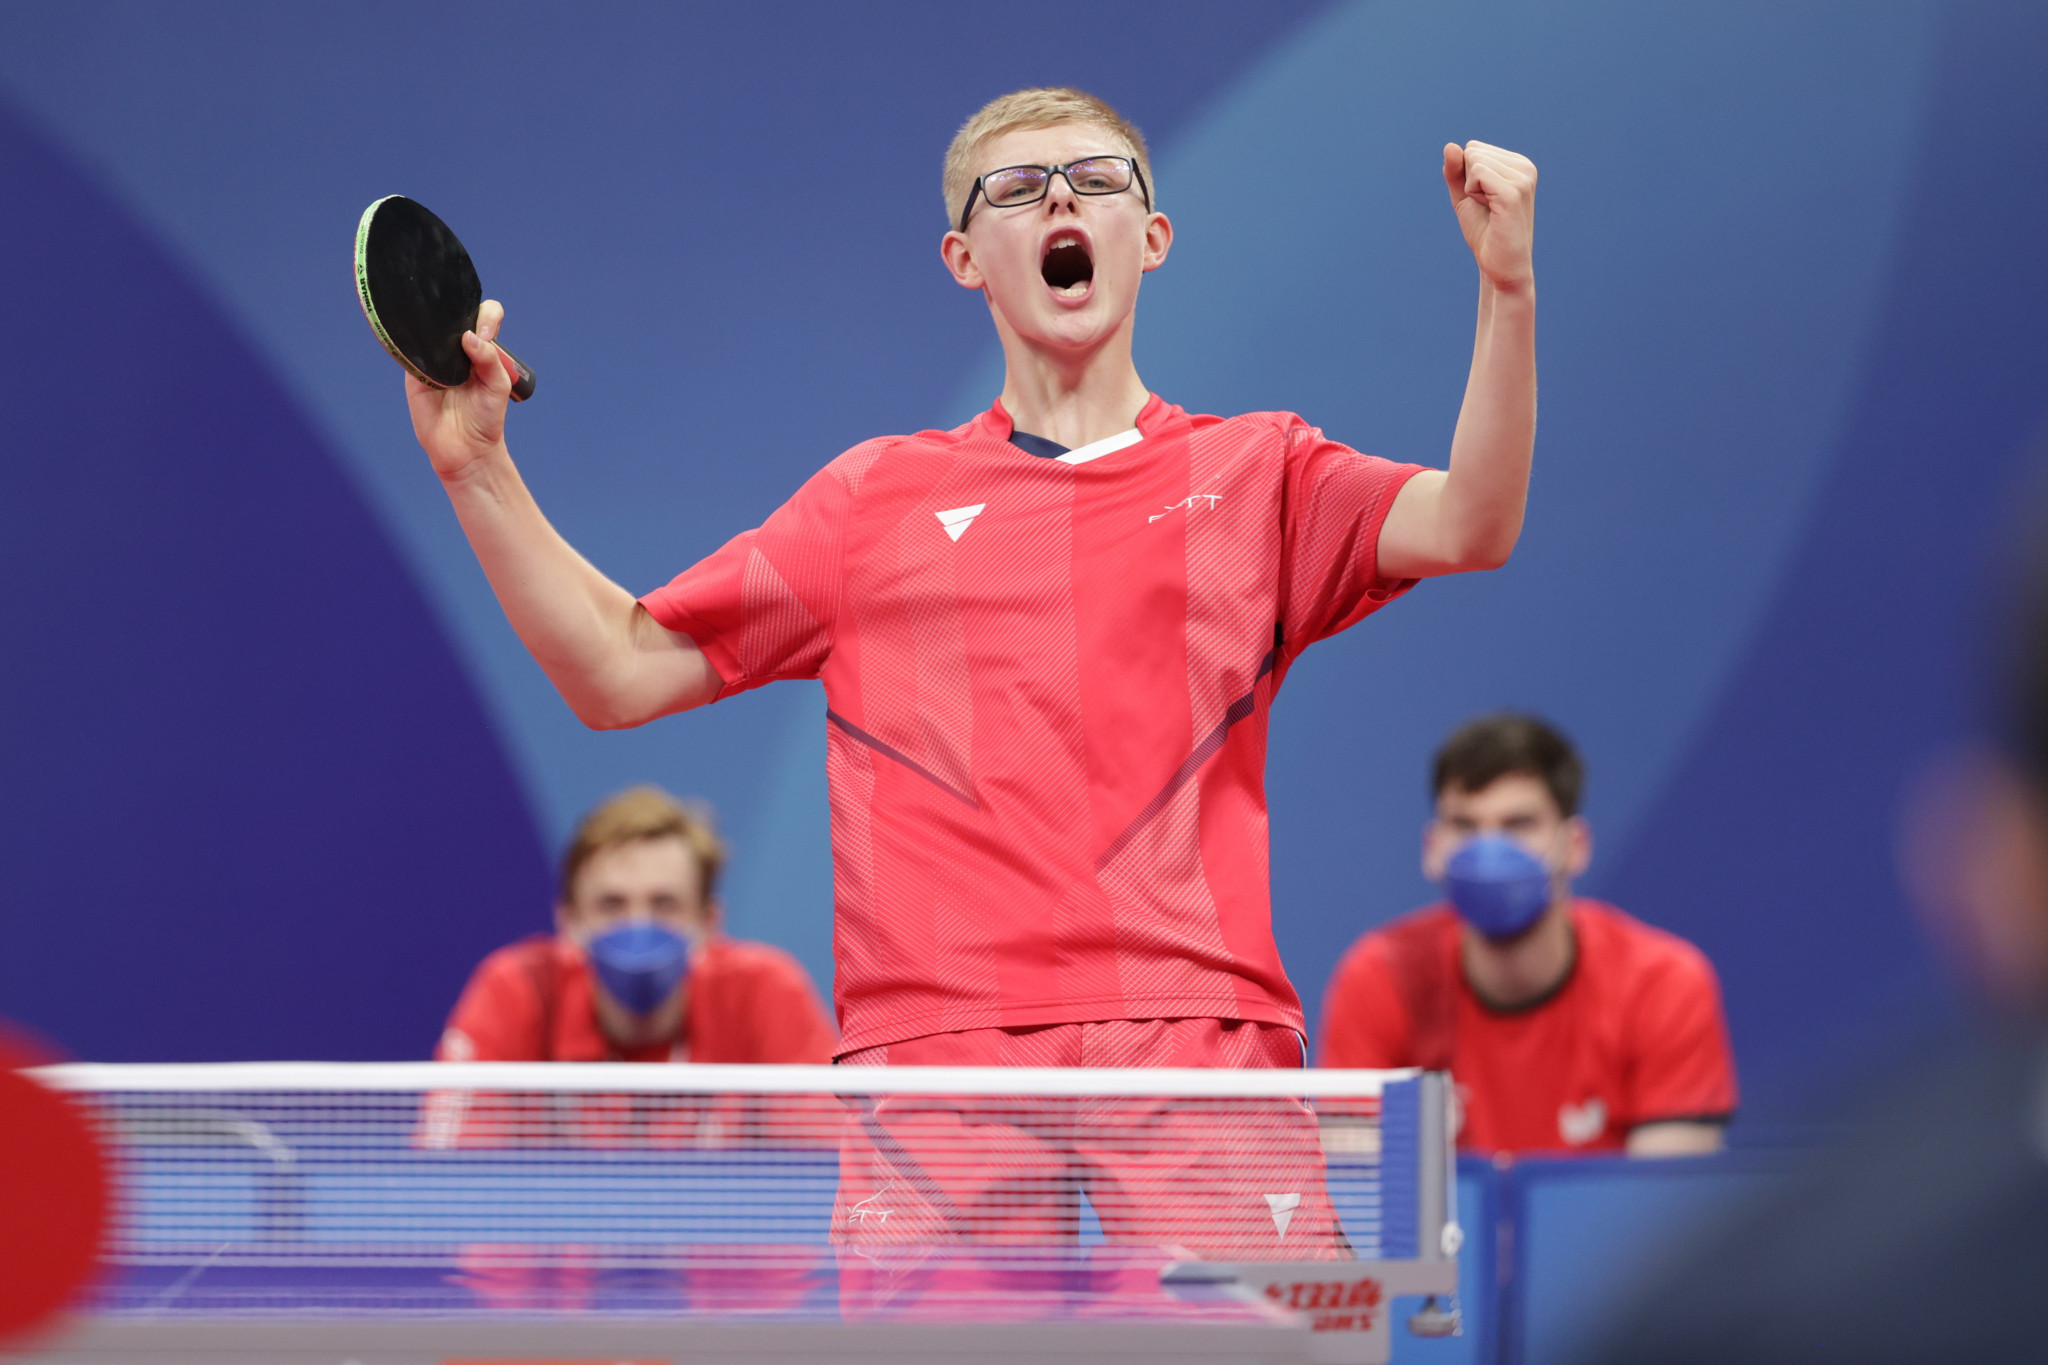 Felix Lebrun is one of the ITTF scholars who impressed at the World Team Table Tennis Championships ©ITTF